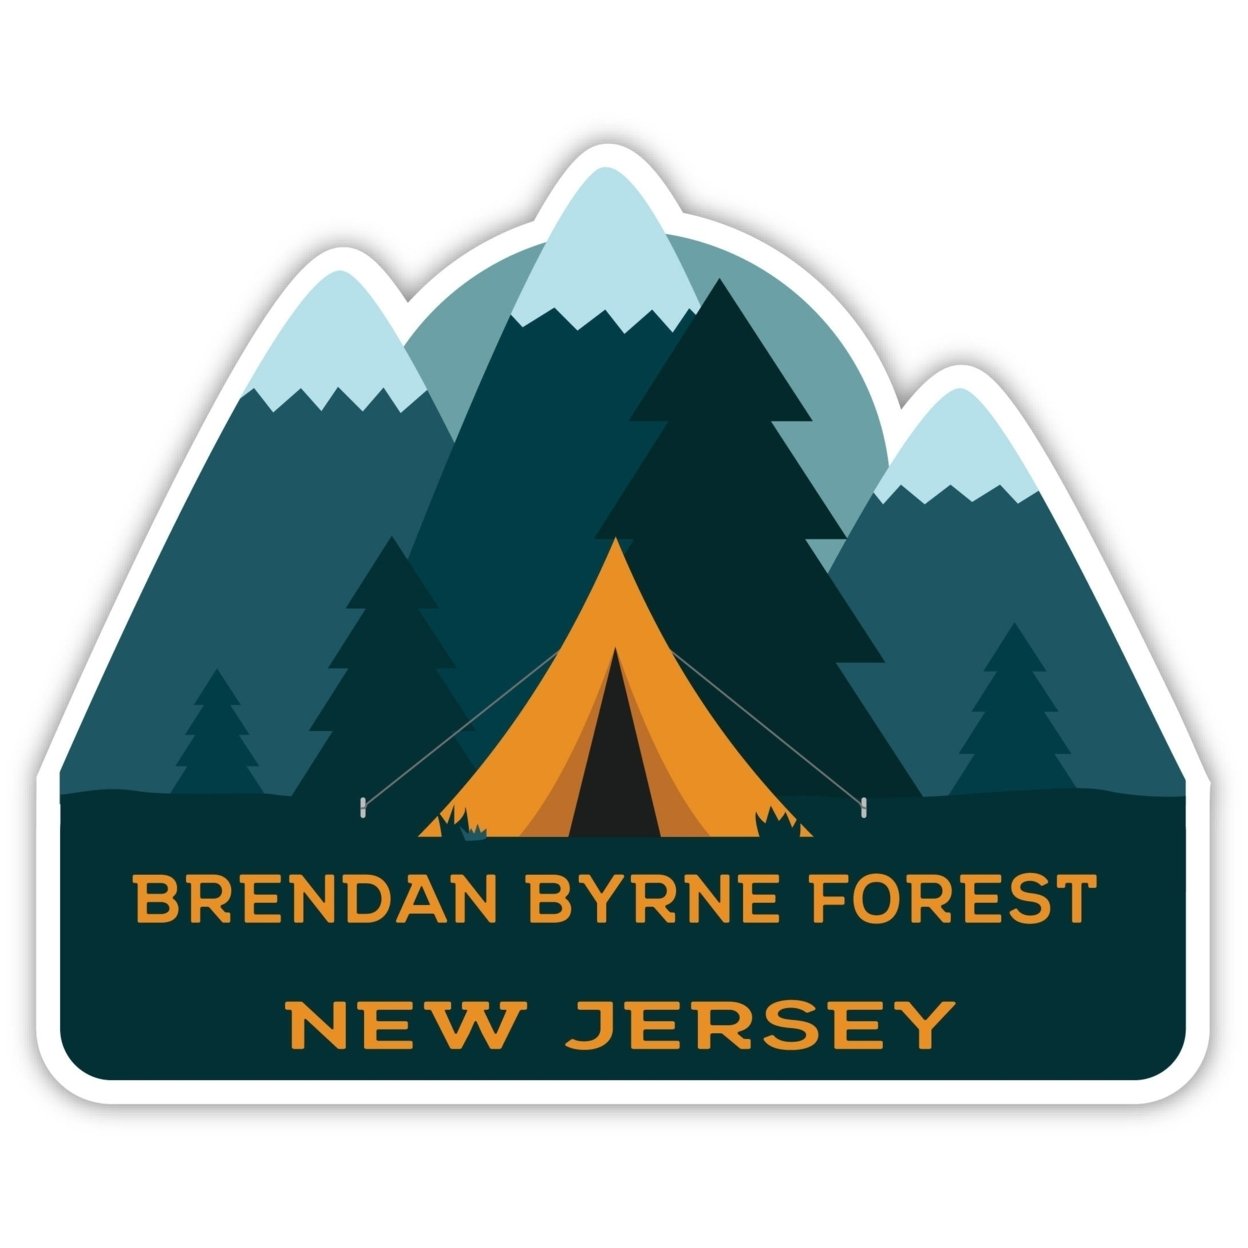 Brendan Byrne Forest New Jersey Souvenir Decorative Stickers (Choose Theme And Size) - 4-Pack, 4-Inch, Tent